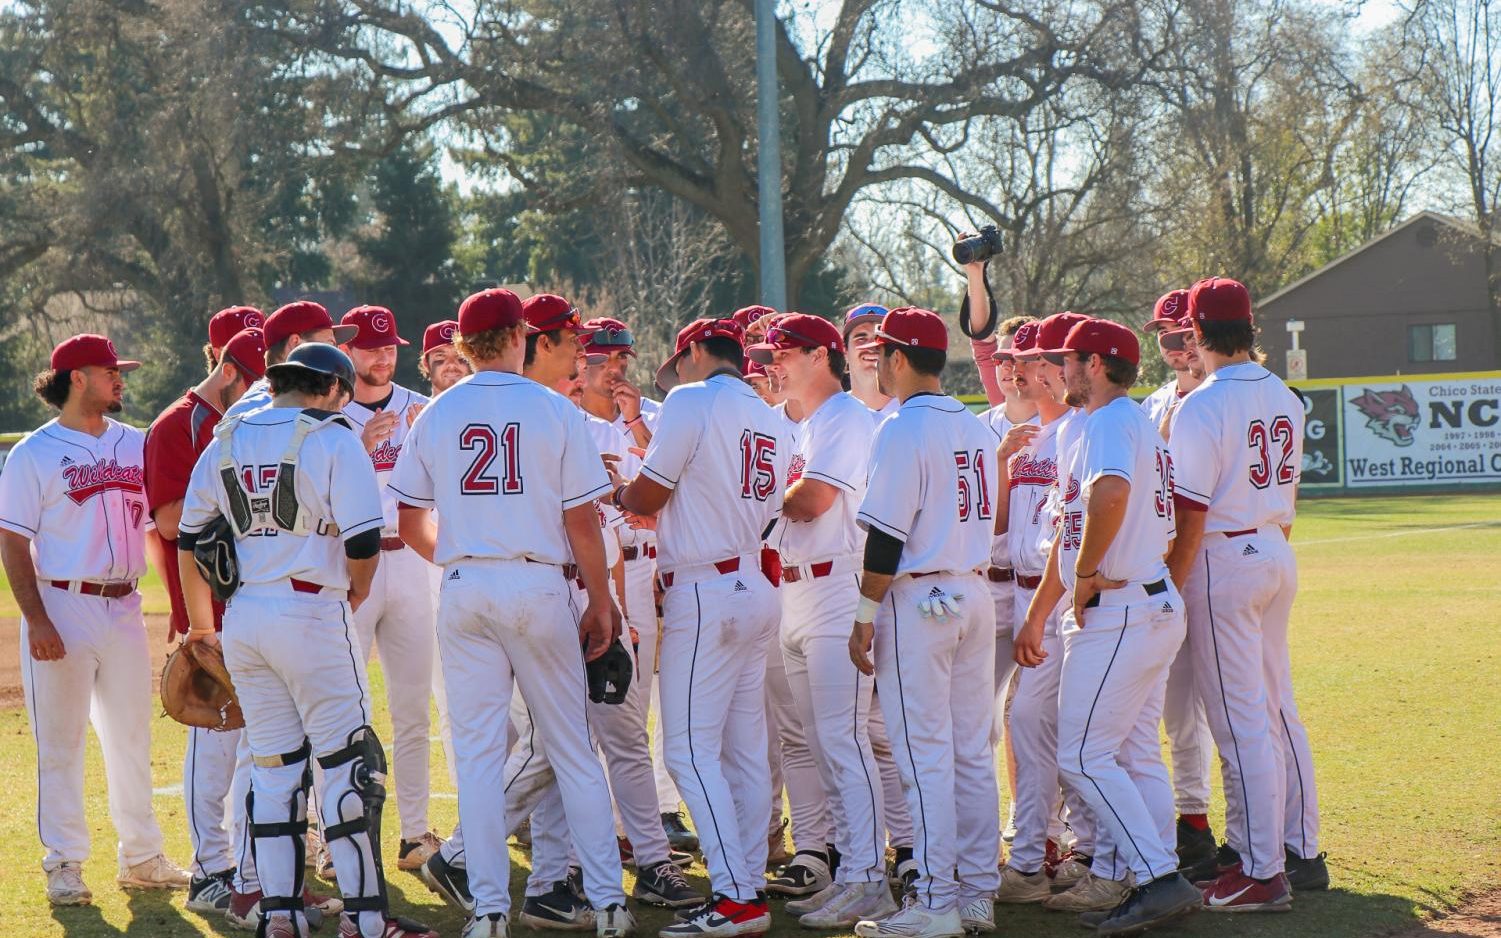 The 2022 Chico State Baseball team gathering around the right field line before the game.